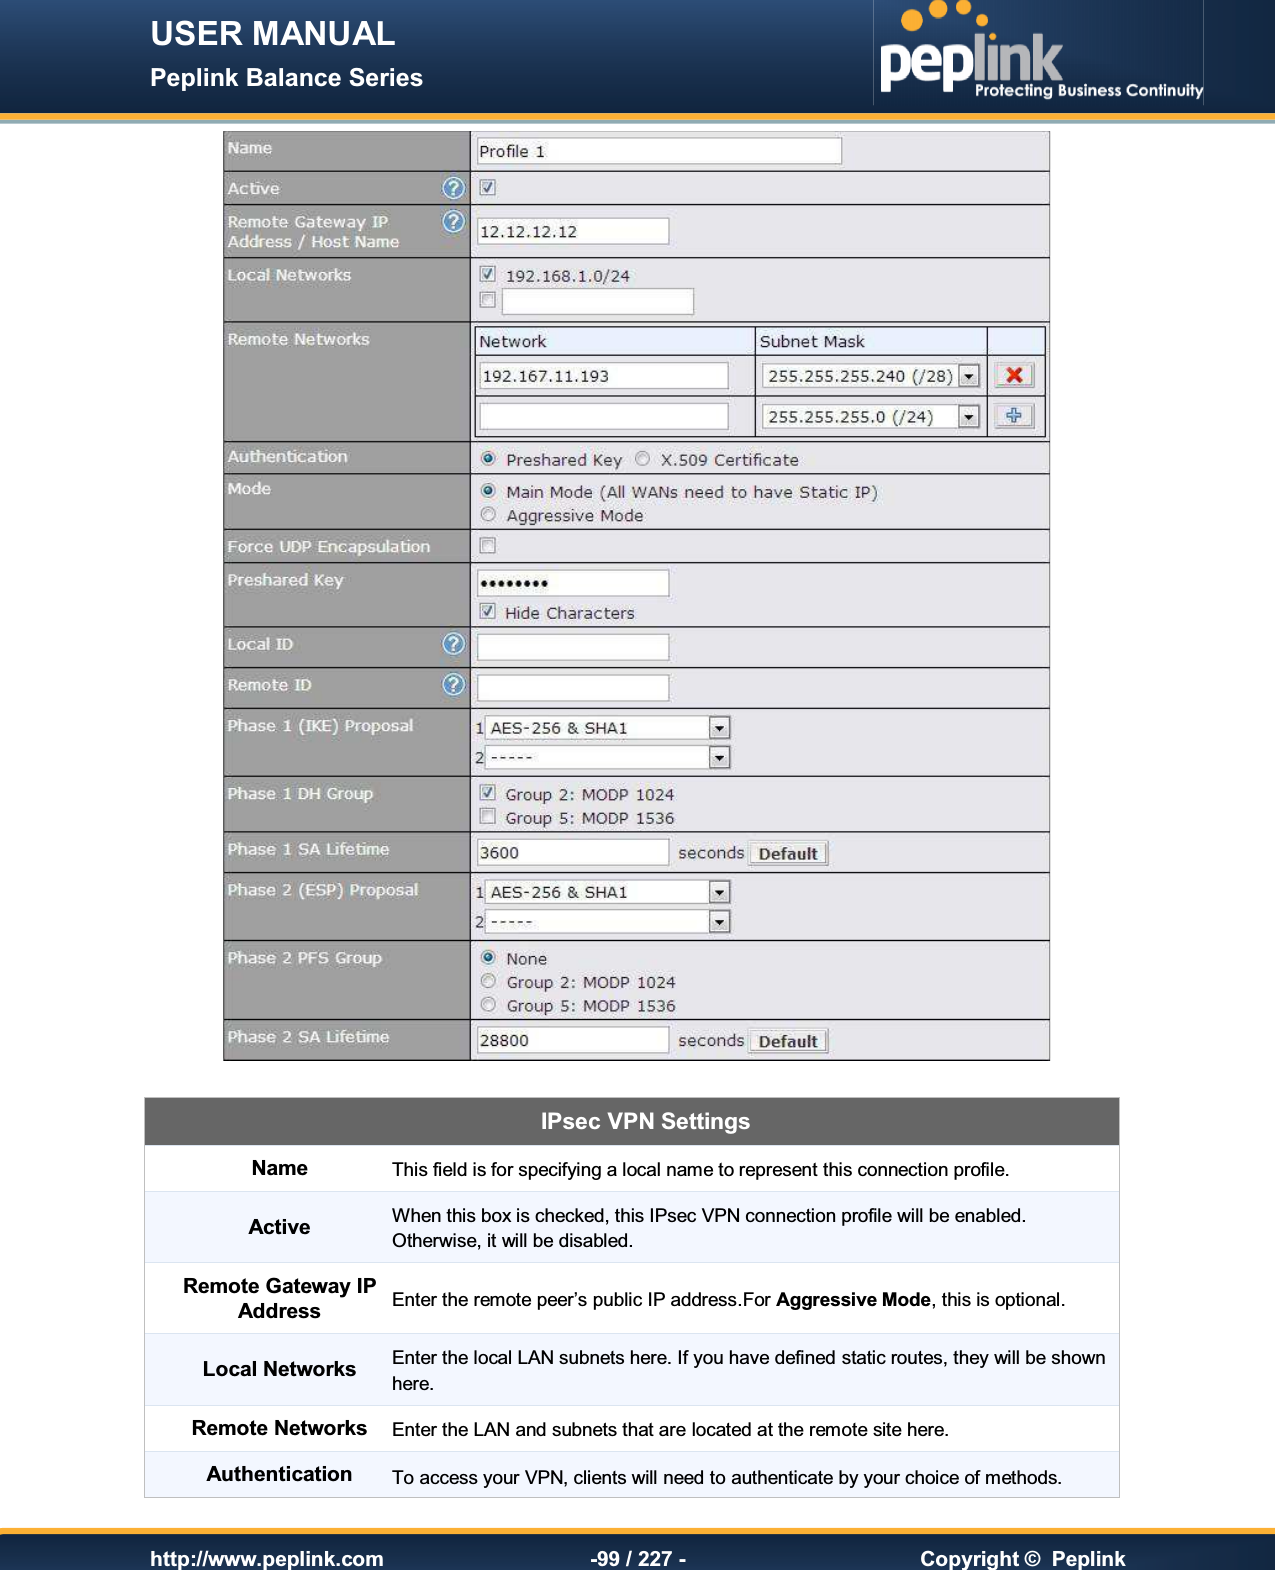 USER MANUAL Peplink Balance Series   http://www.peplink.com -99 / 227 -  Copyright ©  Peplink   IPsec VPN Settings Name This field is for specifying a local name to represent this connection profile.  Active When this box is checked, this IPsec VPN connection profile will be enabled. Otherwise, it will be disabled. Remote Gateway IP Address Enter the remote peer’s public IP address.For Aggressive Mode, this is optional. Local Networks Enter the local LAN subnets here. If you have defined static routes, they will be shown here. Remote Networks  Enter the LAN and subnets that are located at the remote site here. Authentication To access your VPN, clients will need to authenticate by your choice of methods. 